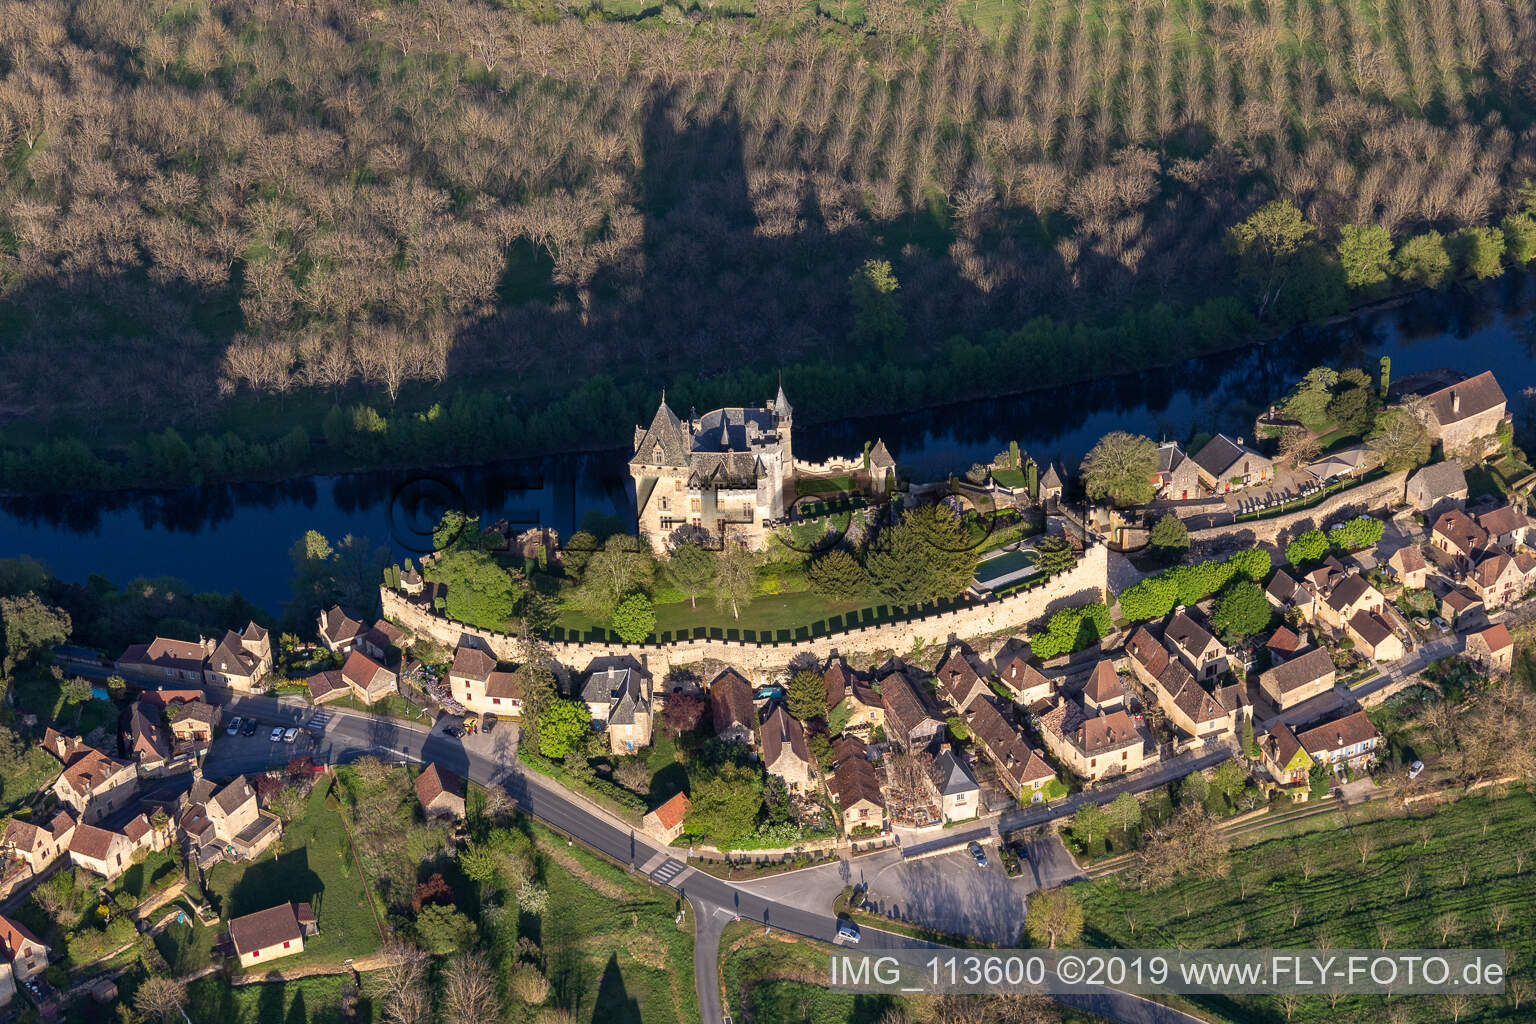 Montfort in Vitrac in the state Dordogne, France from the plane